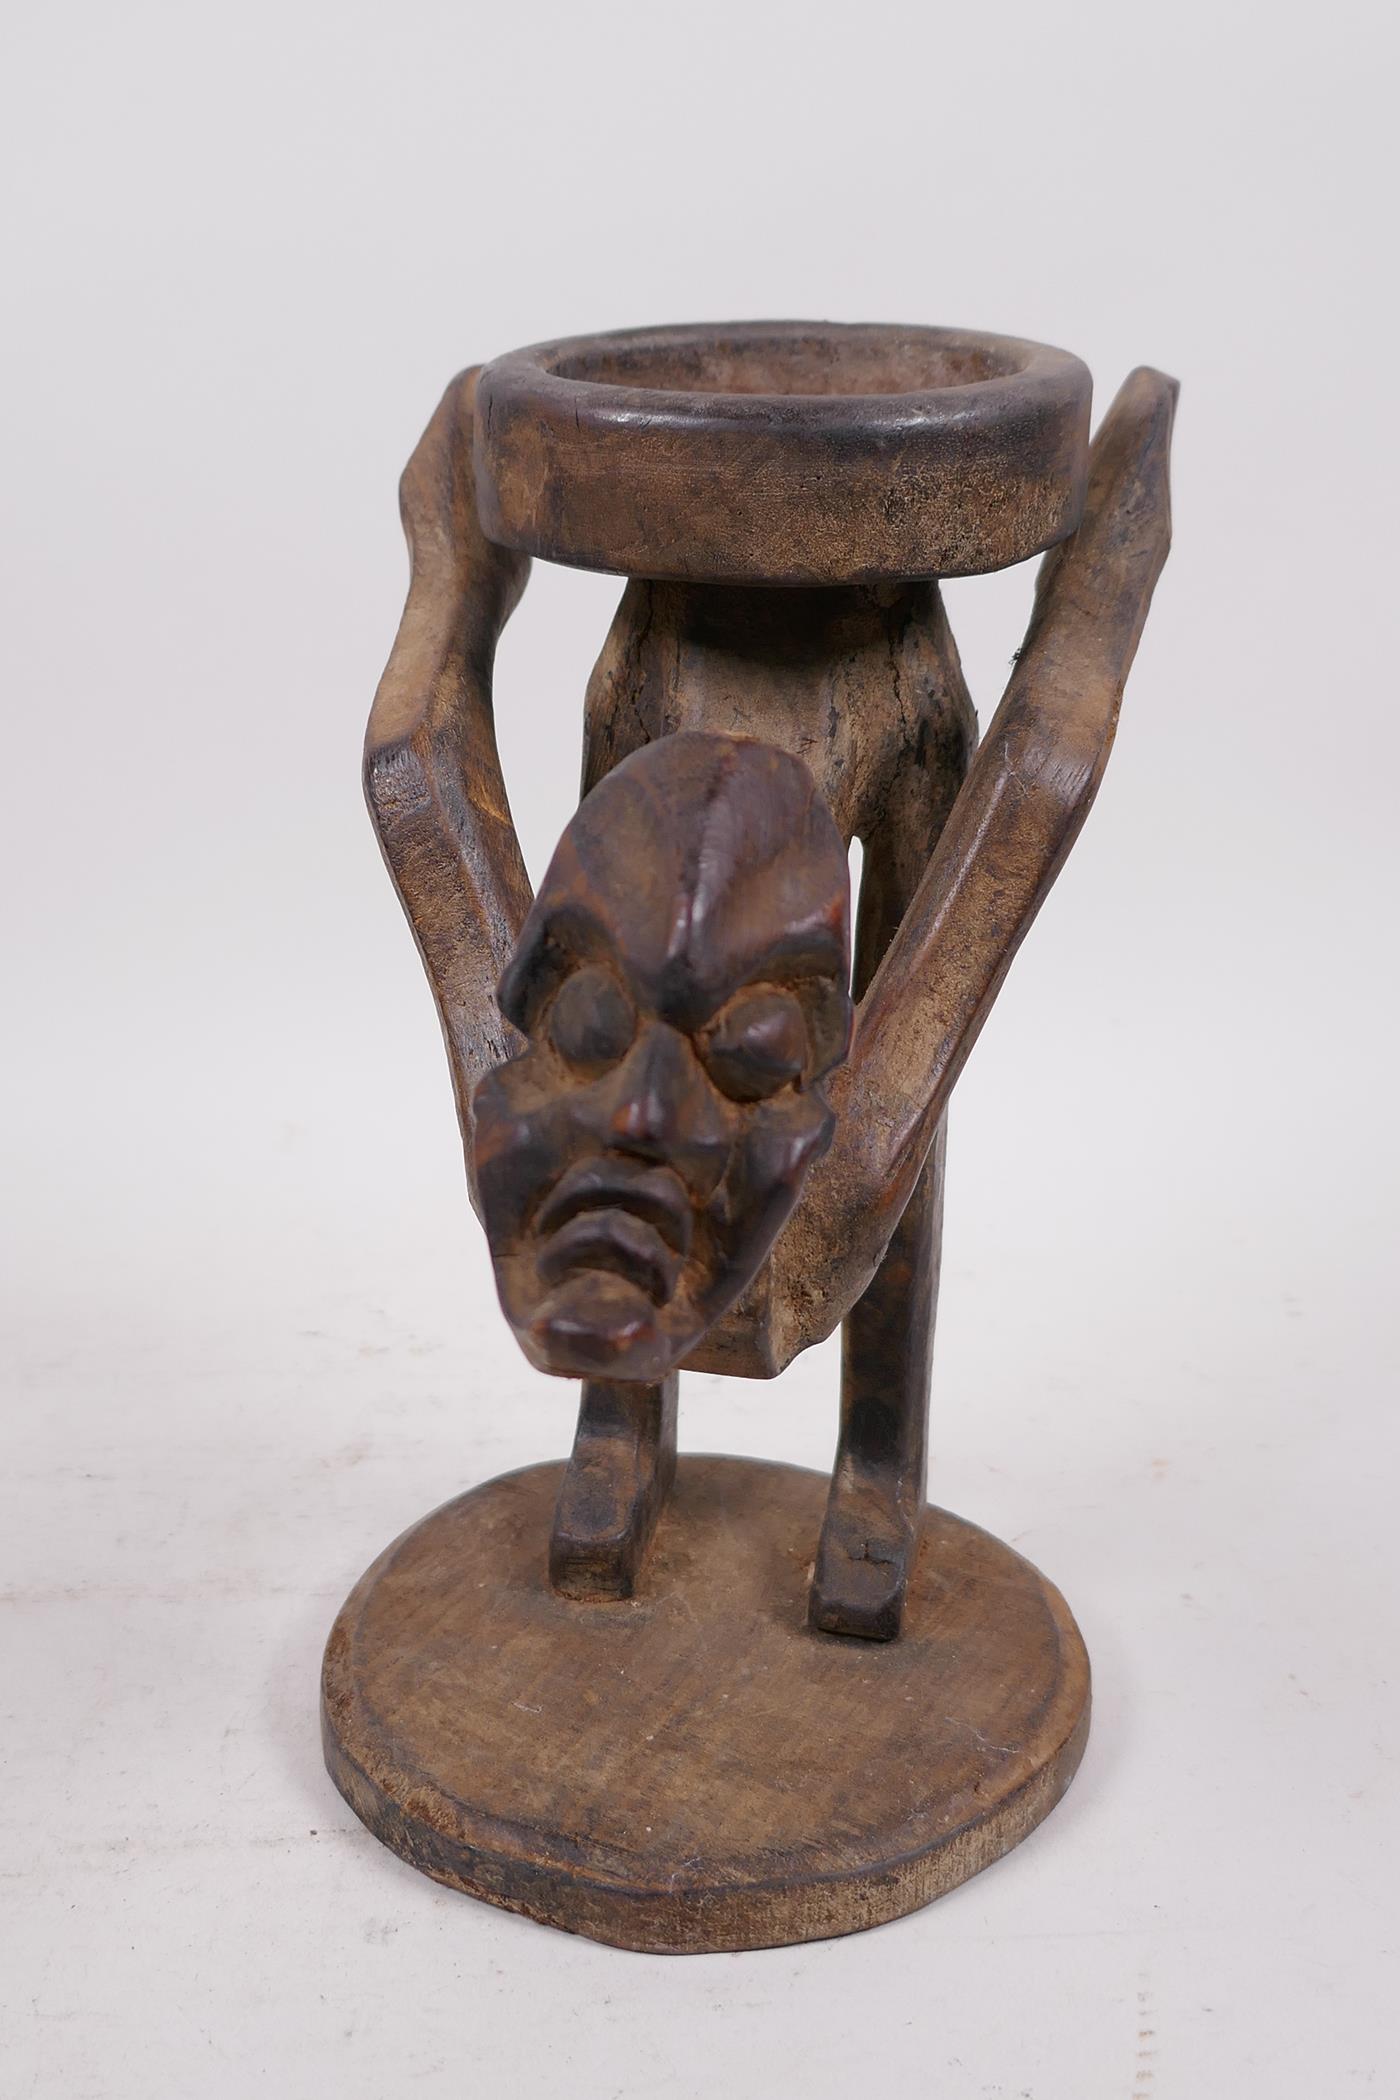 An unusual Indonesian wood figure carved as a stand, 9" high - Image 2 of 4